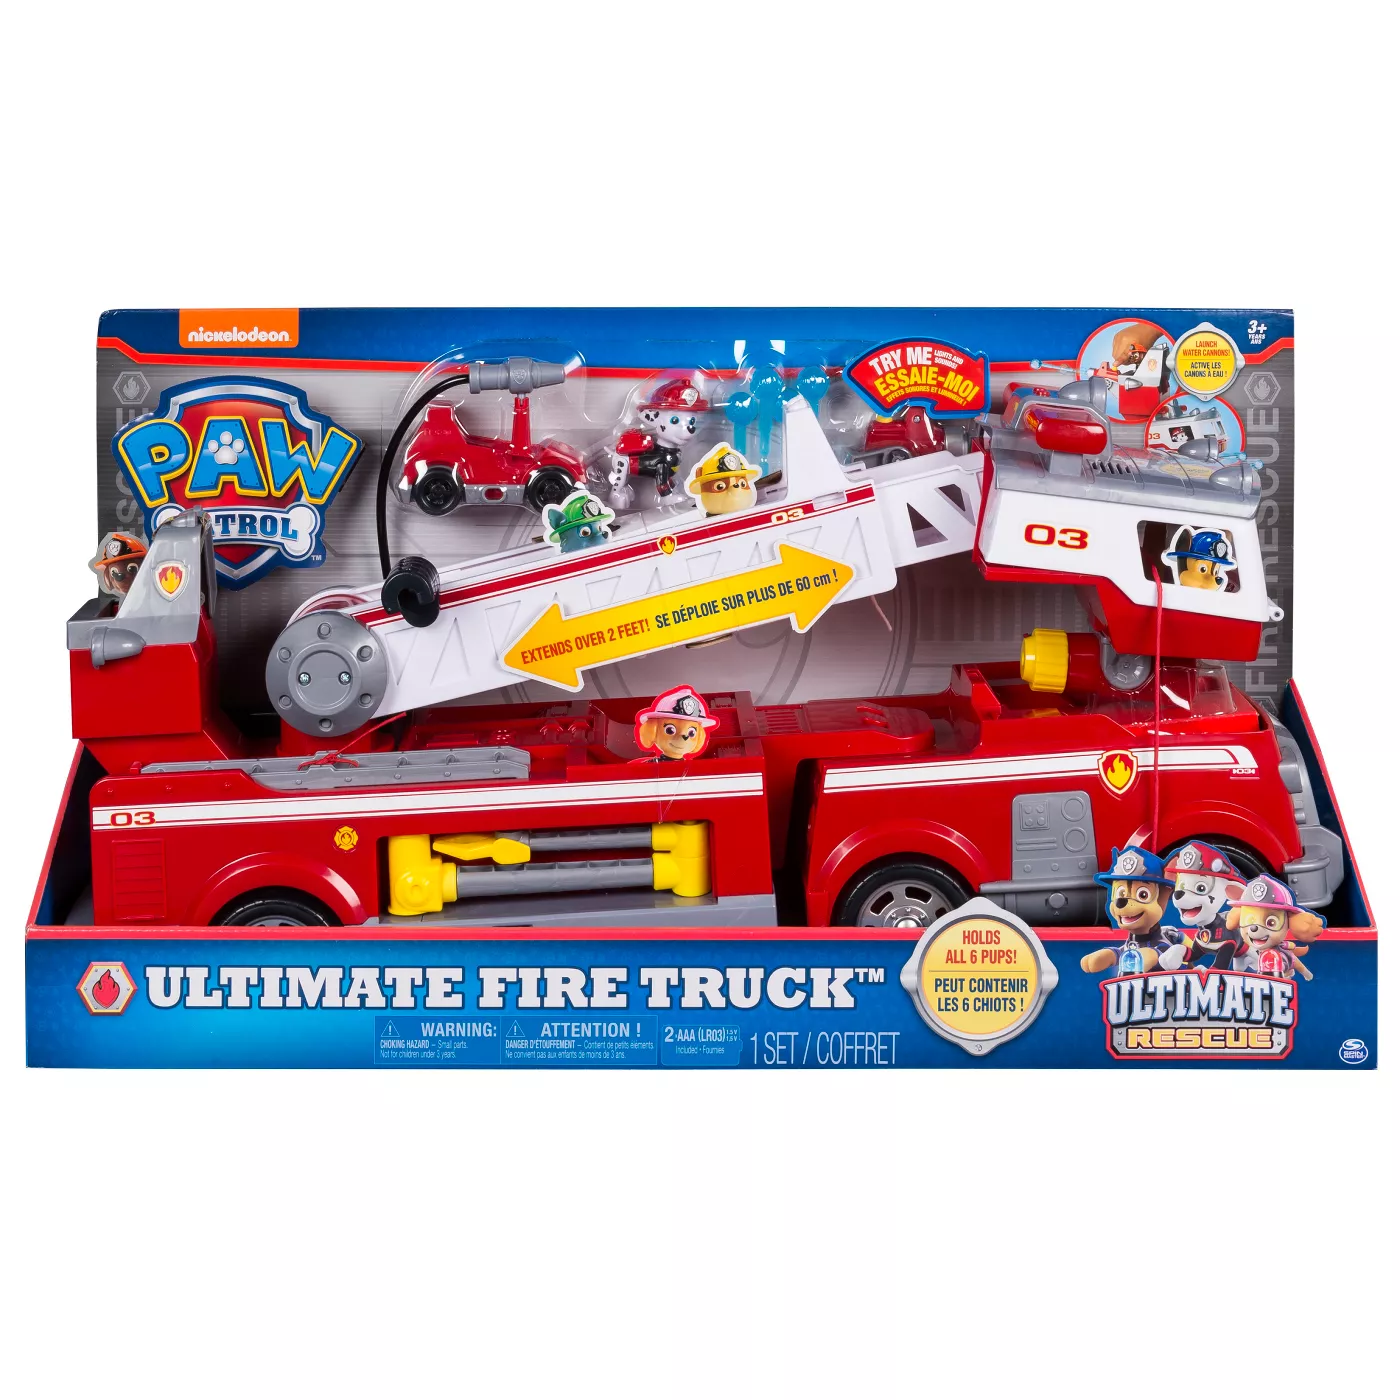 PAW Patrol Ultimate Fire Truck - image 2 of 8